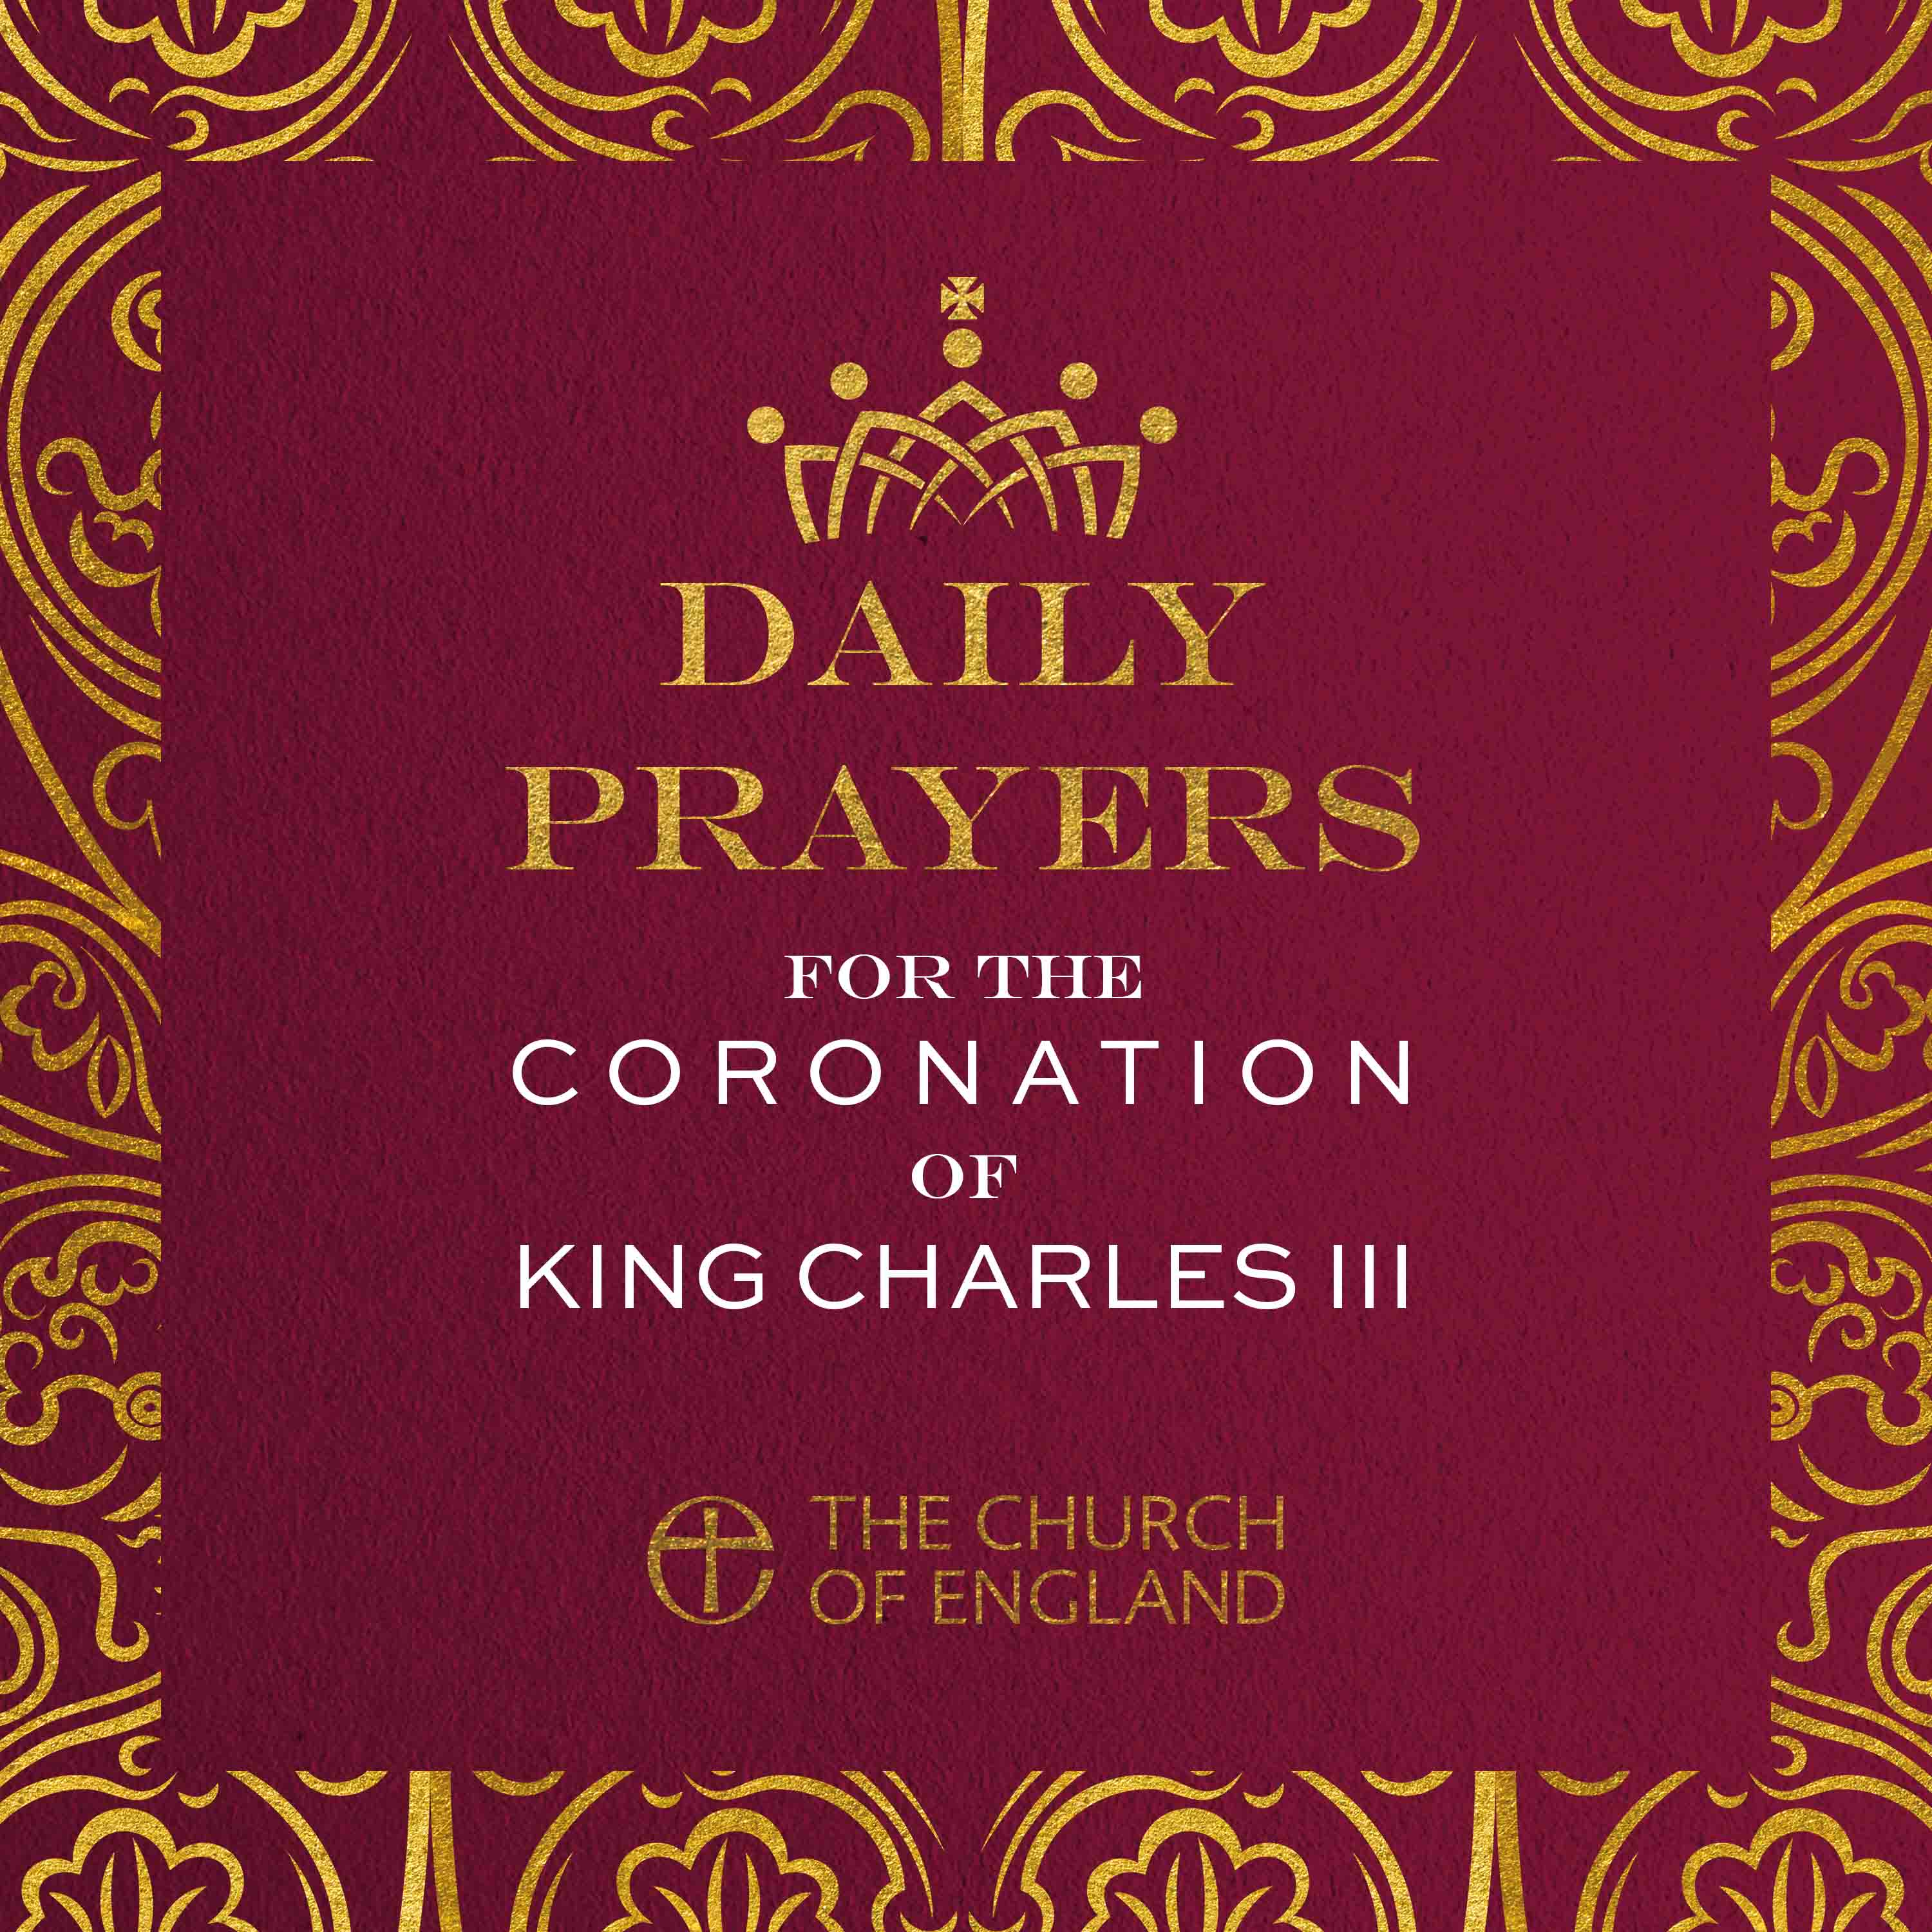 Artwork for Daily Prayers for the Coronation of King Charles III